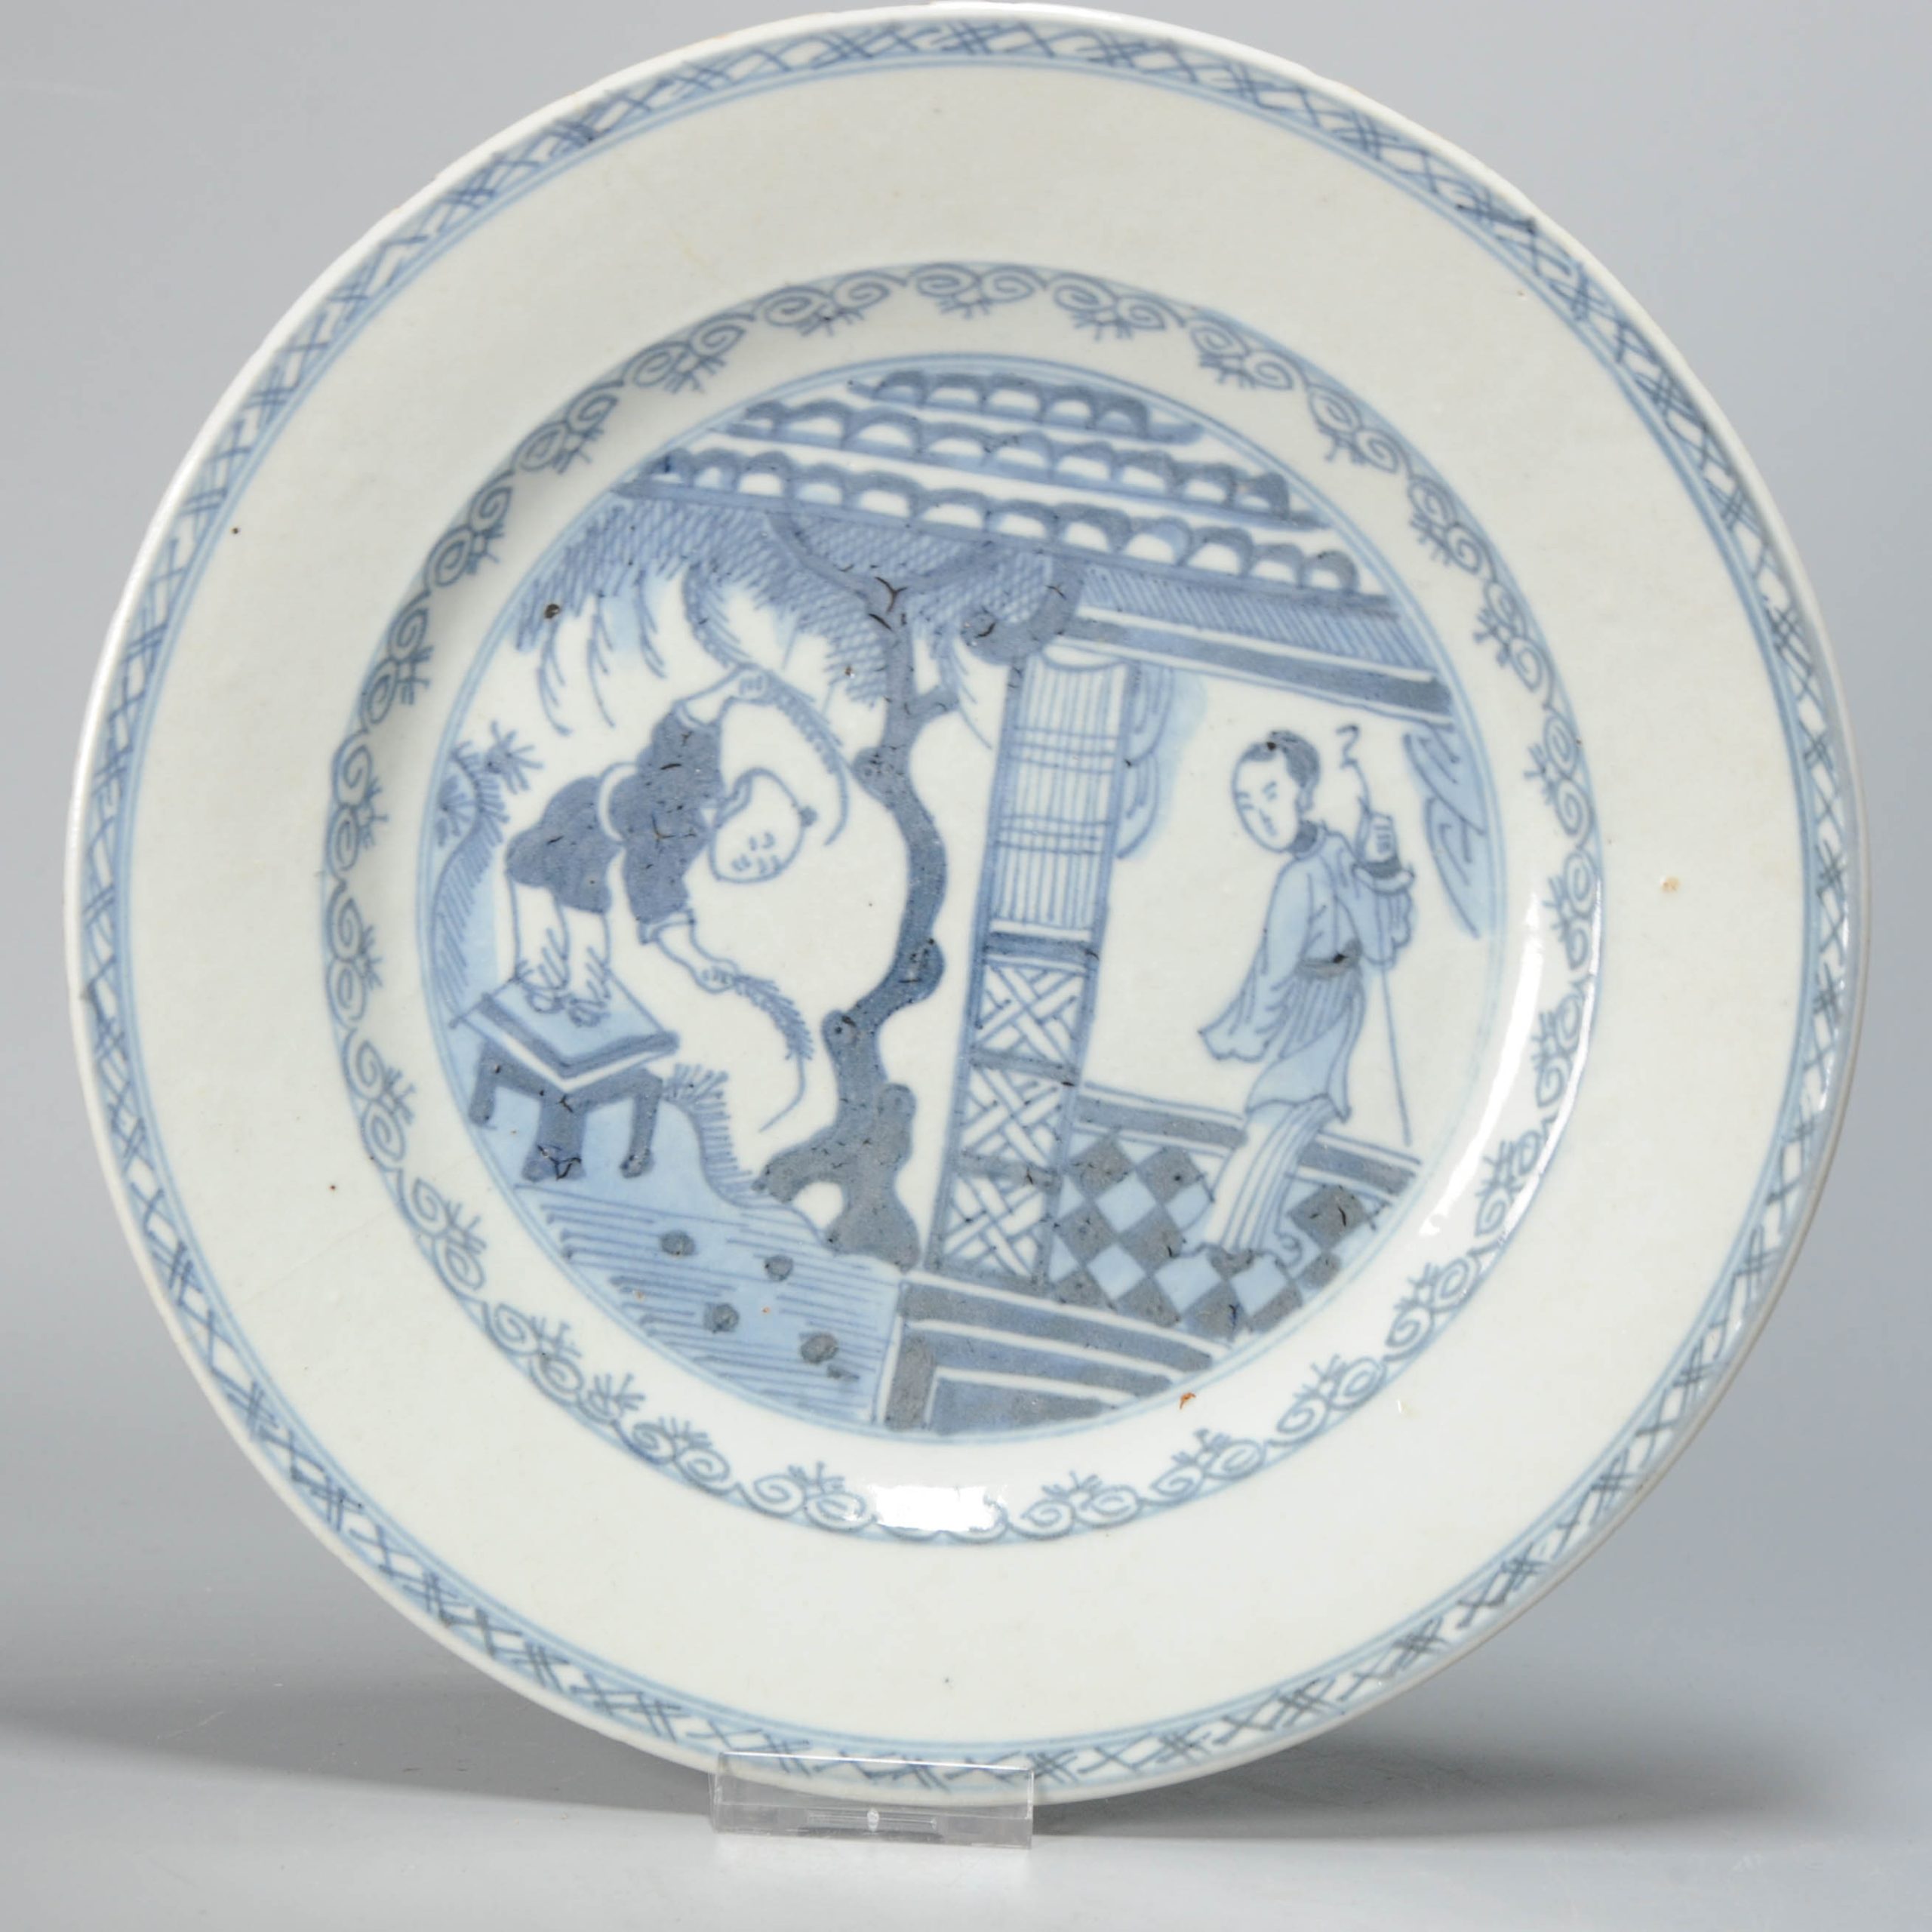 0976 Antique Plate with Blue and White Boy and Lady Qianlong Period (1736-1795)